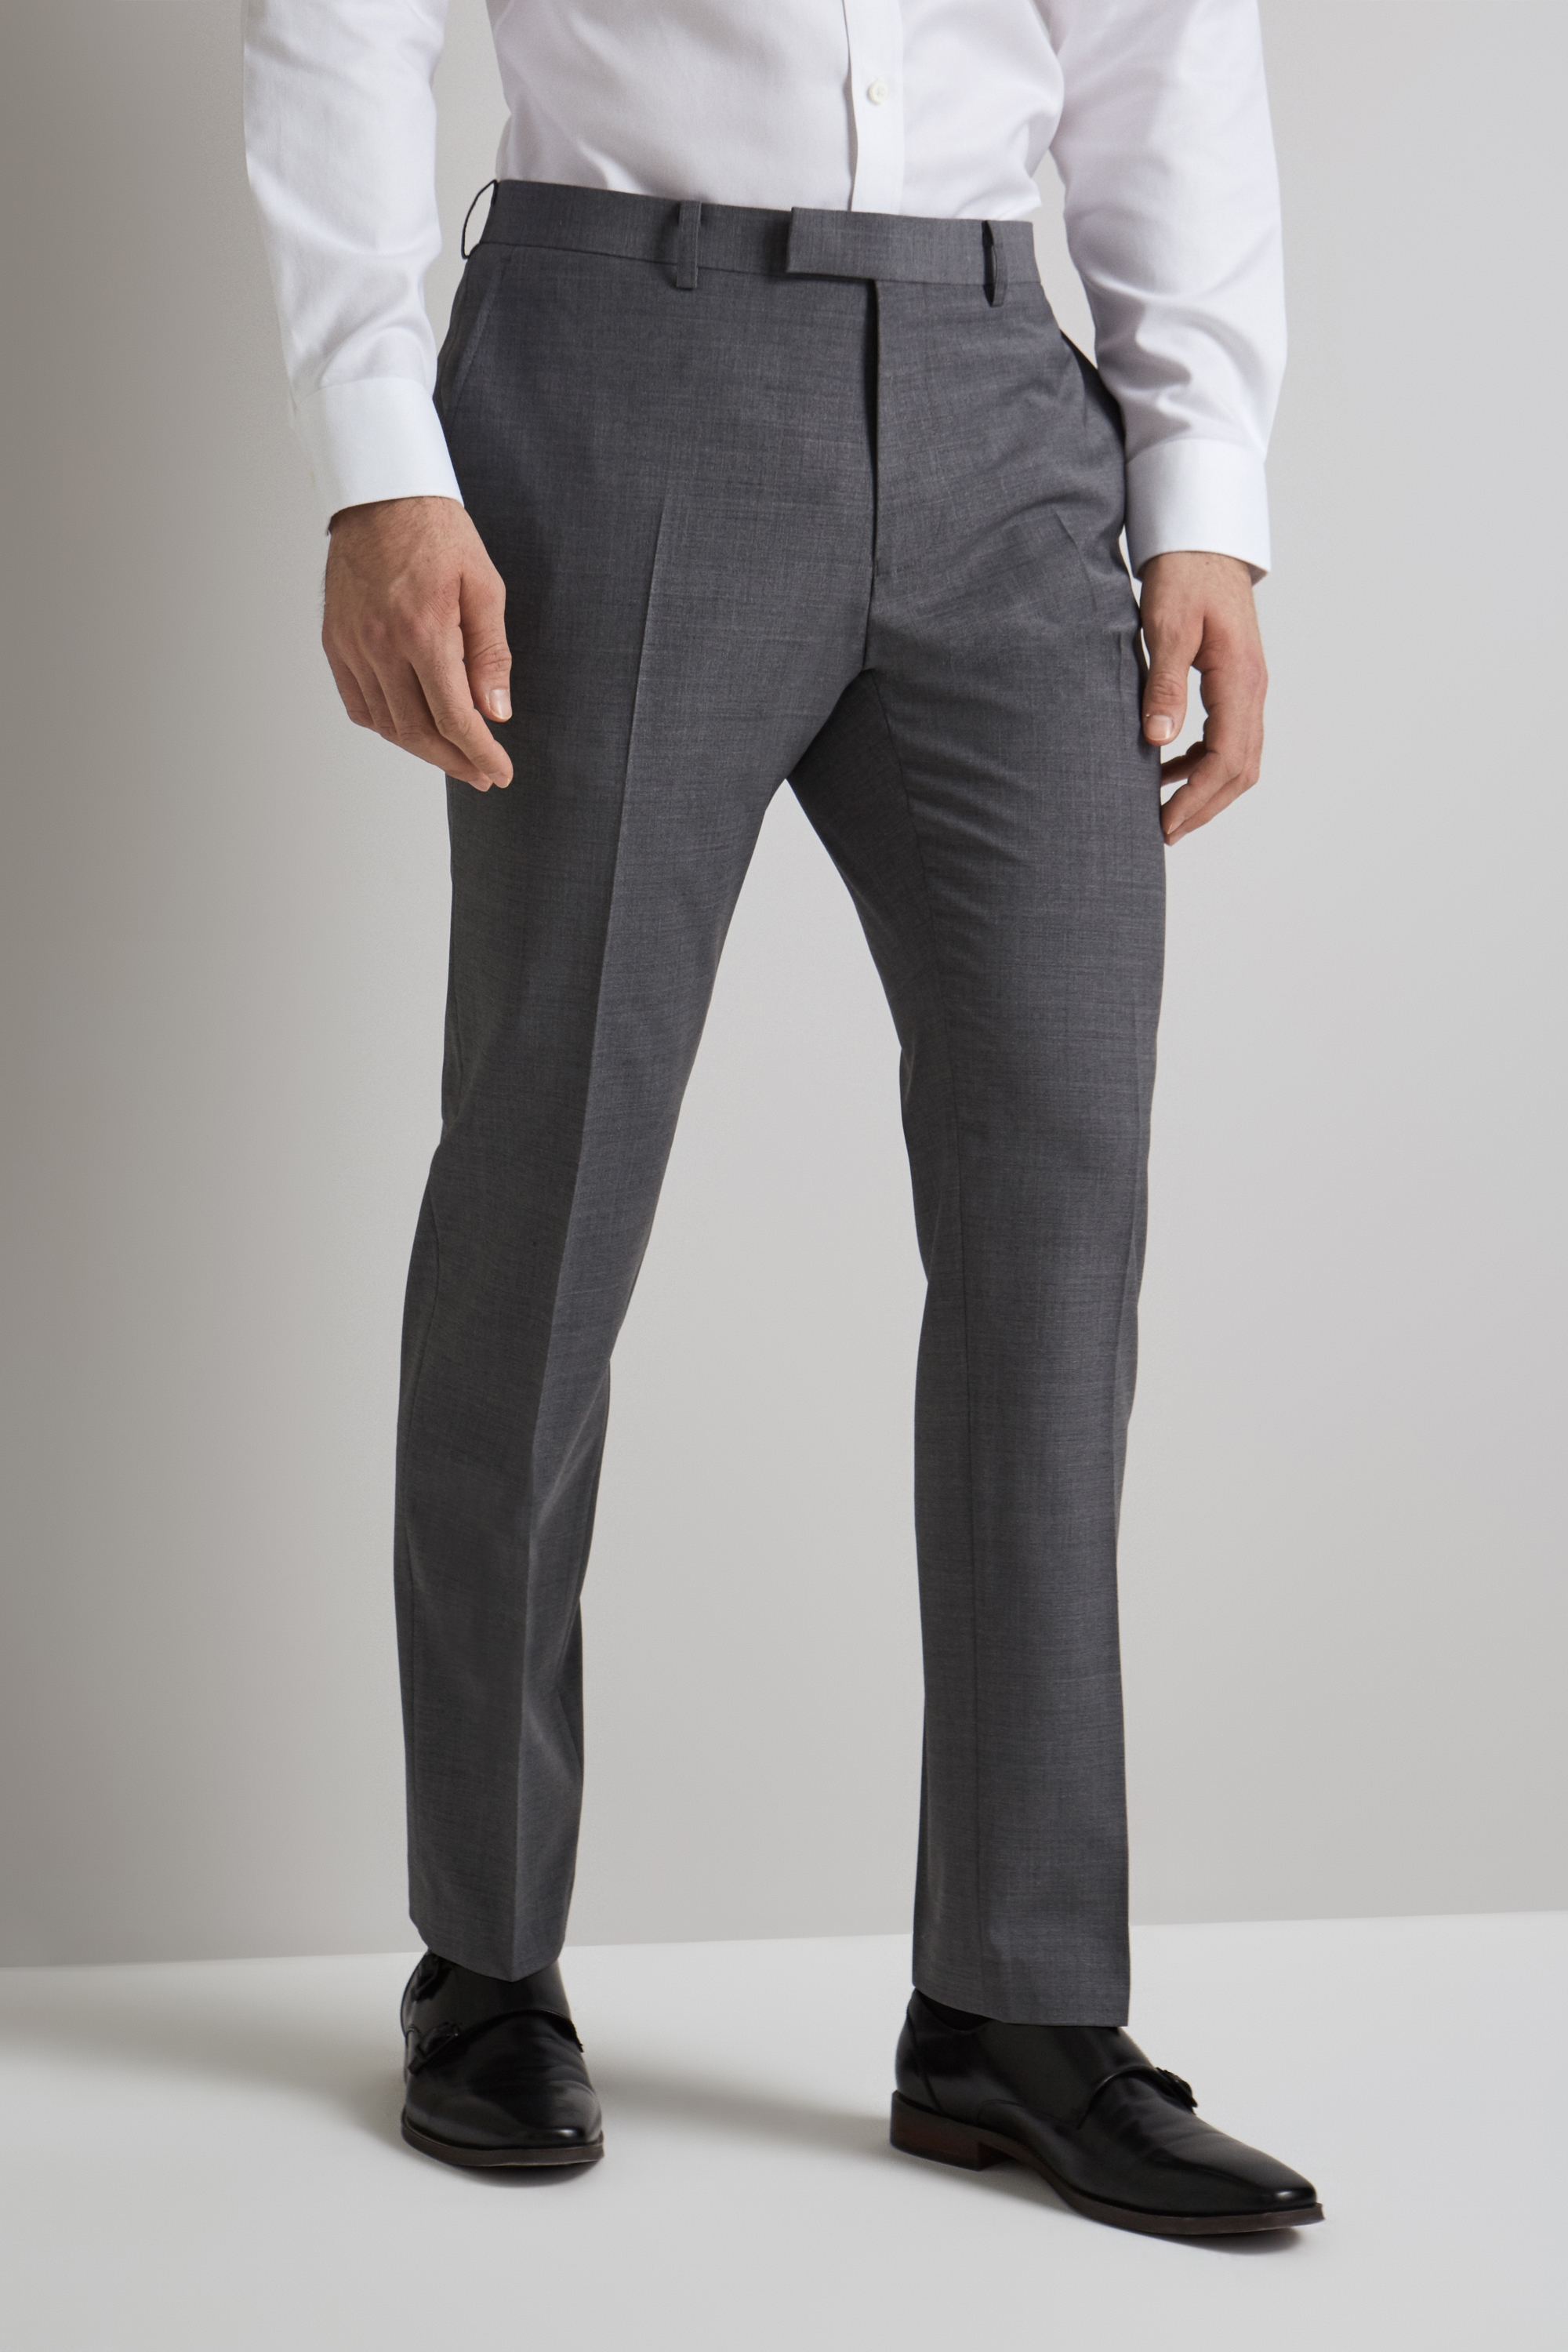 Moss 1851 Performance Tailored Fit Light Grey Pants